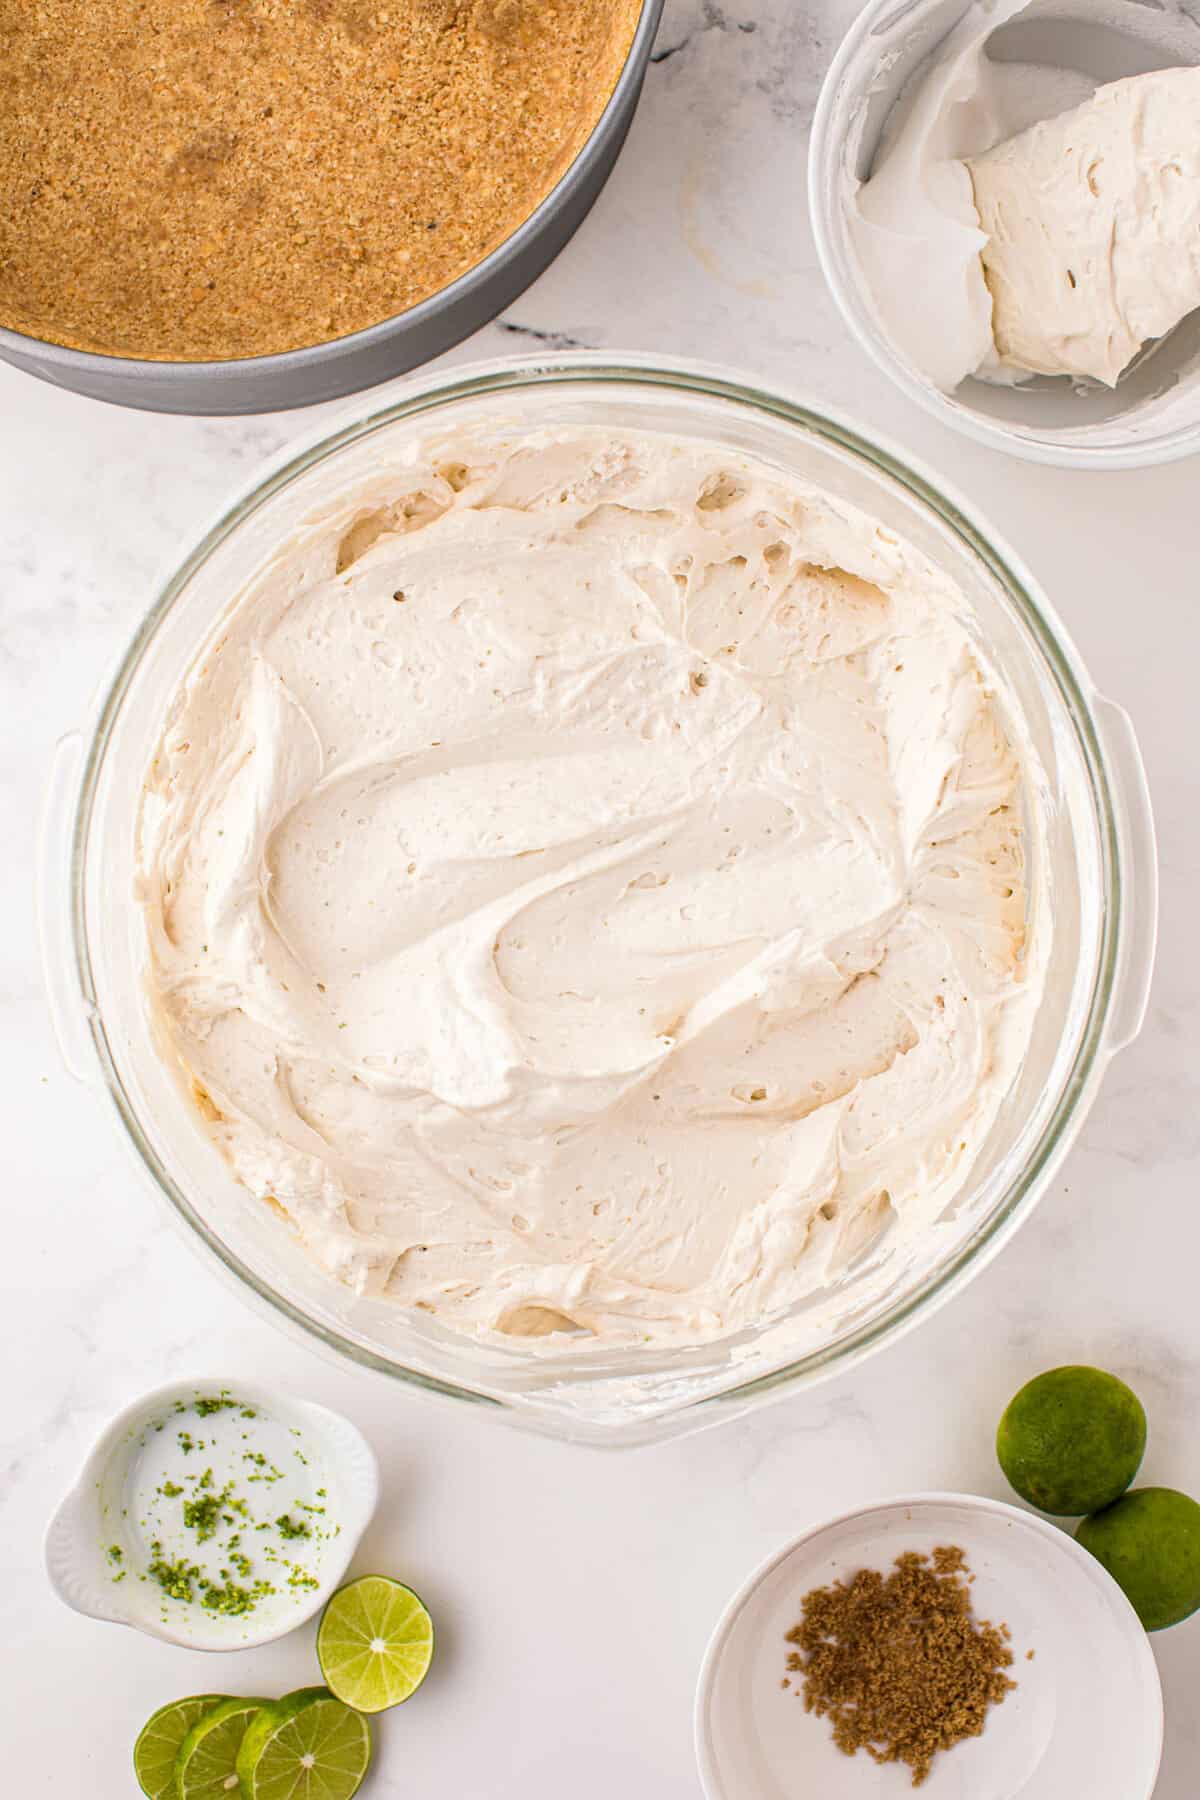 No Bake Key Lime Cheesecake Recipe Ready to be Added to Springform Pan